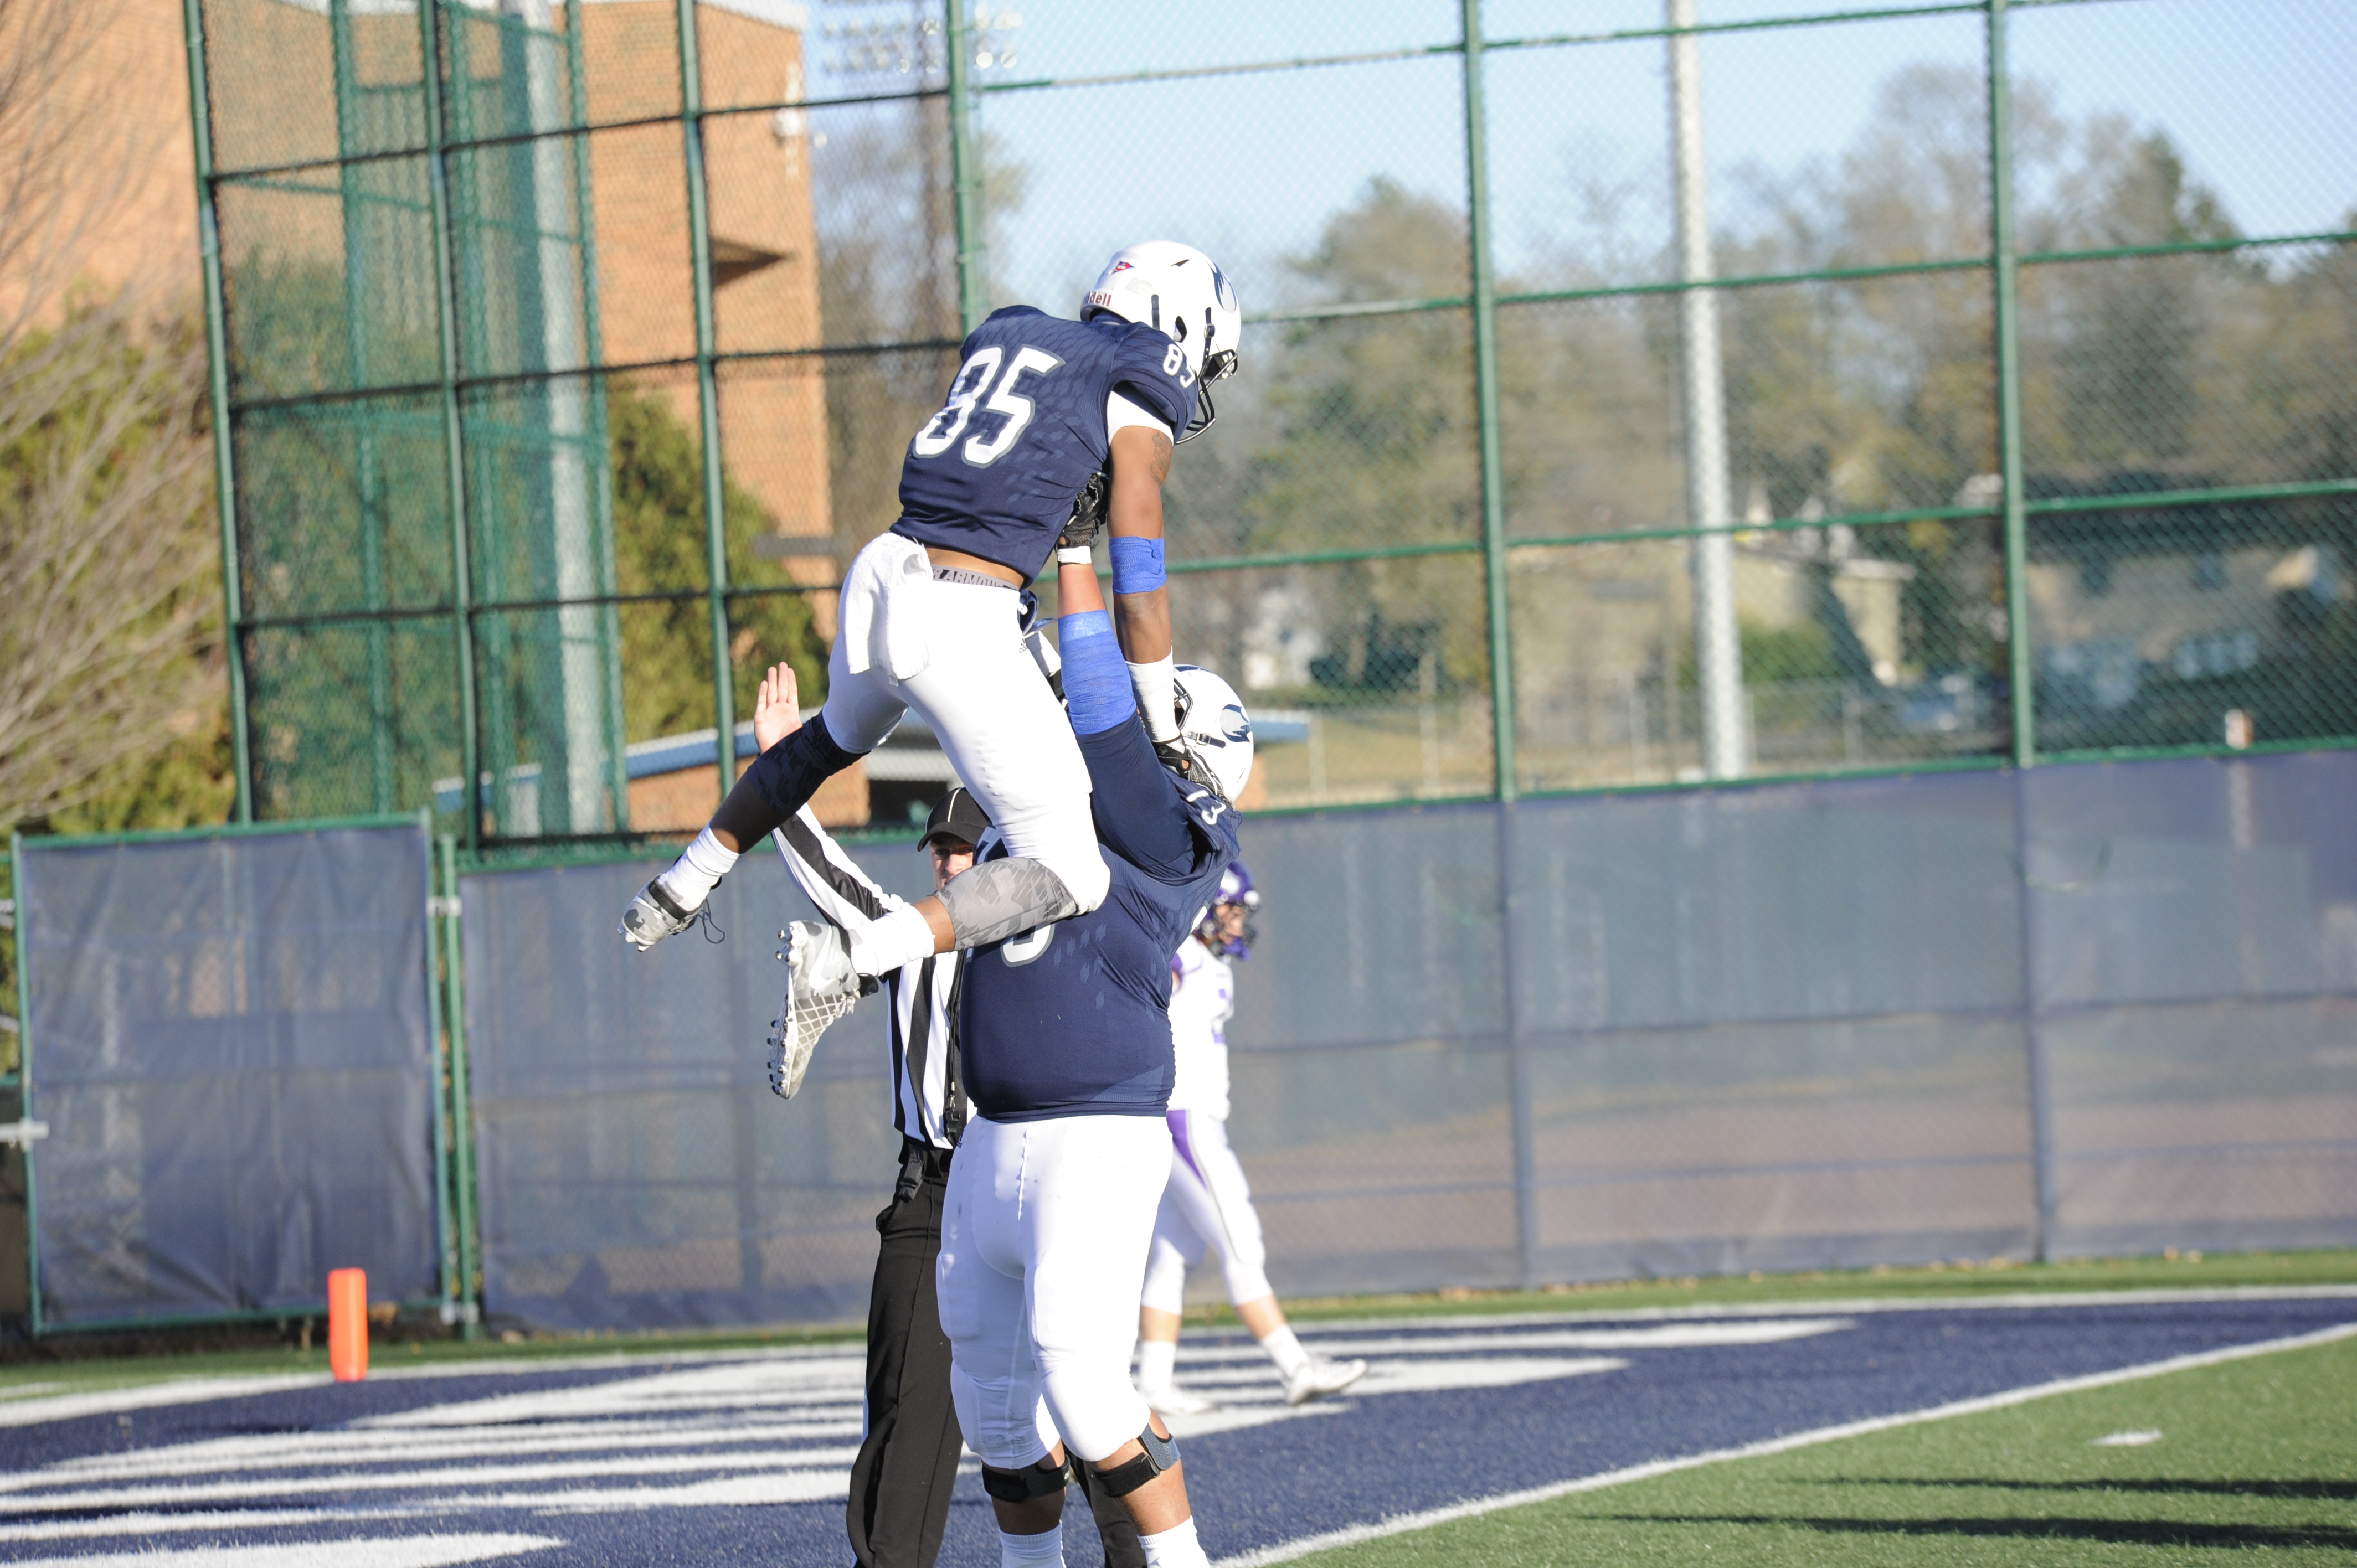 Offensive lineman Kane’ala Atchison-Keolanui (Sr, Lodi, Wis) celebrating with wide receiver Brian Sandifer (Jr, St. Paul, Min) after scoring a touchdown against nationally ranked UW–Whitewater. 